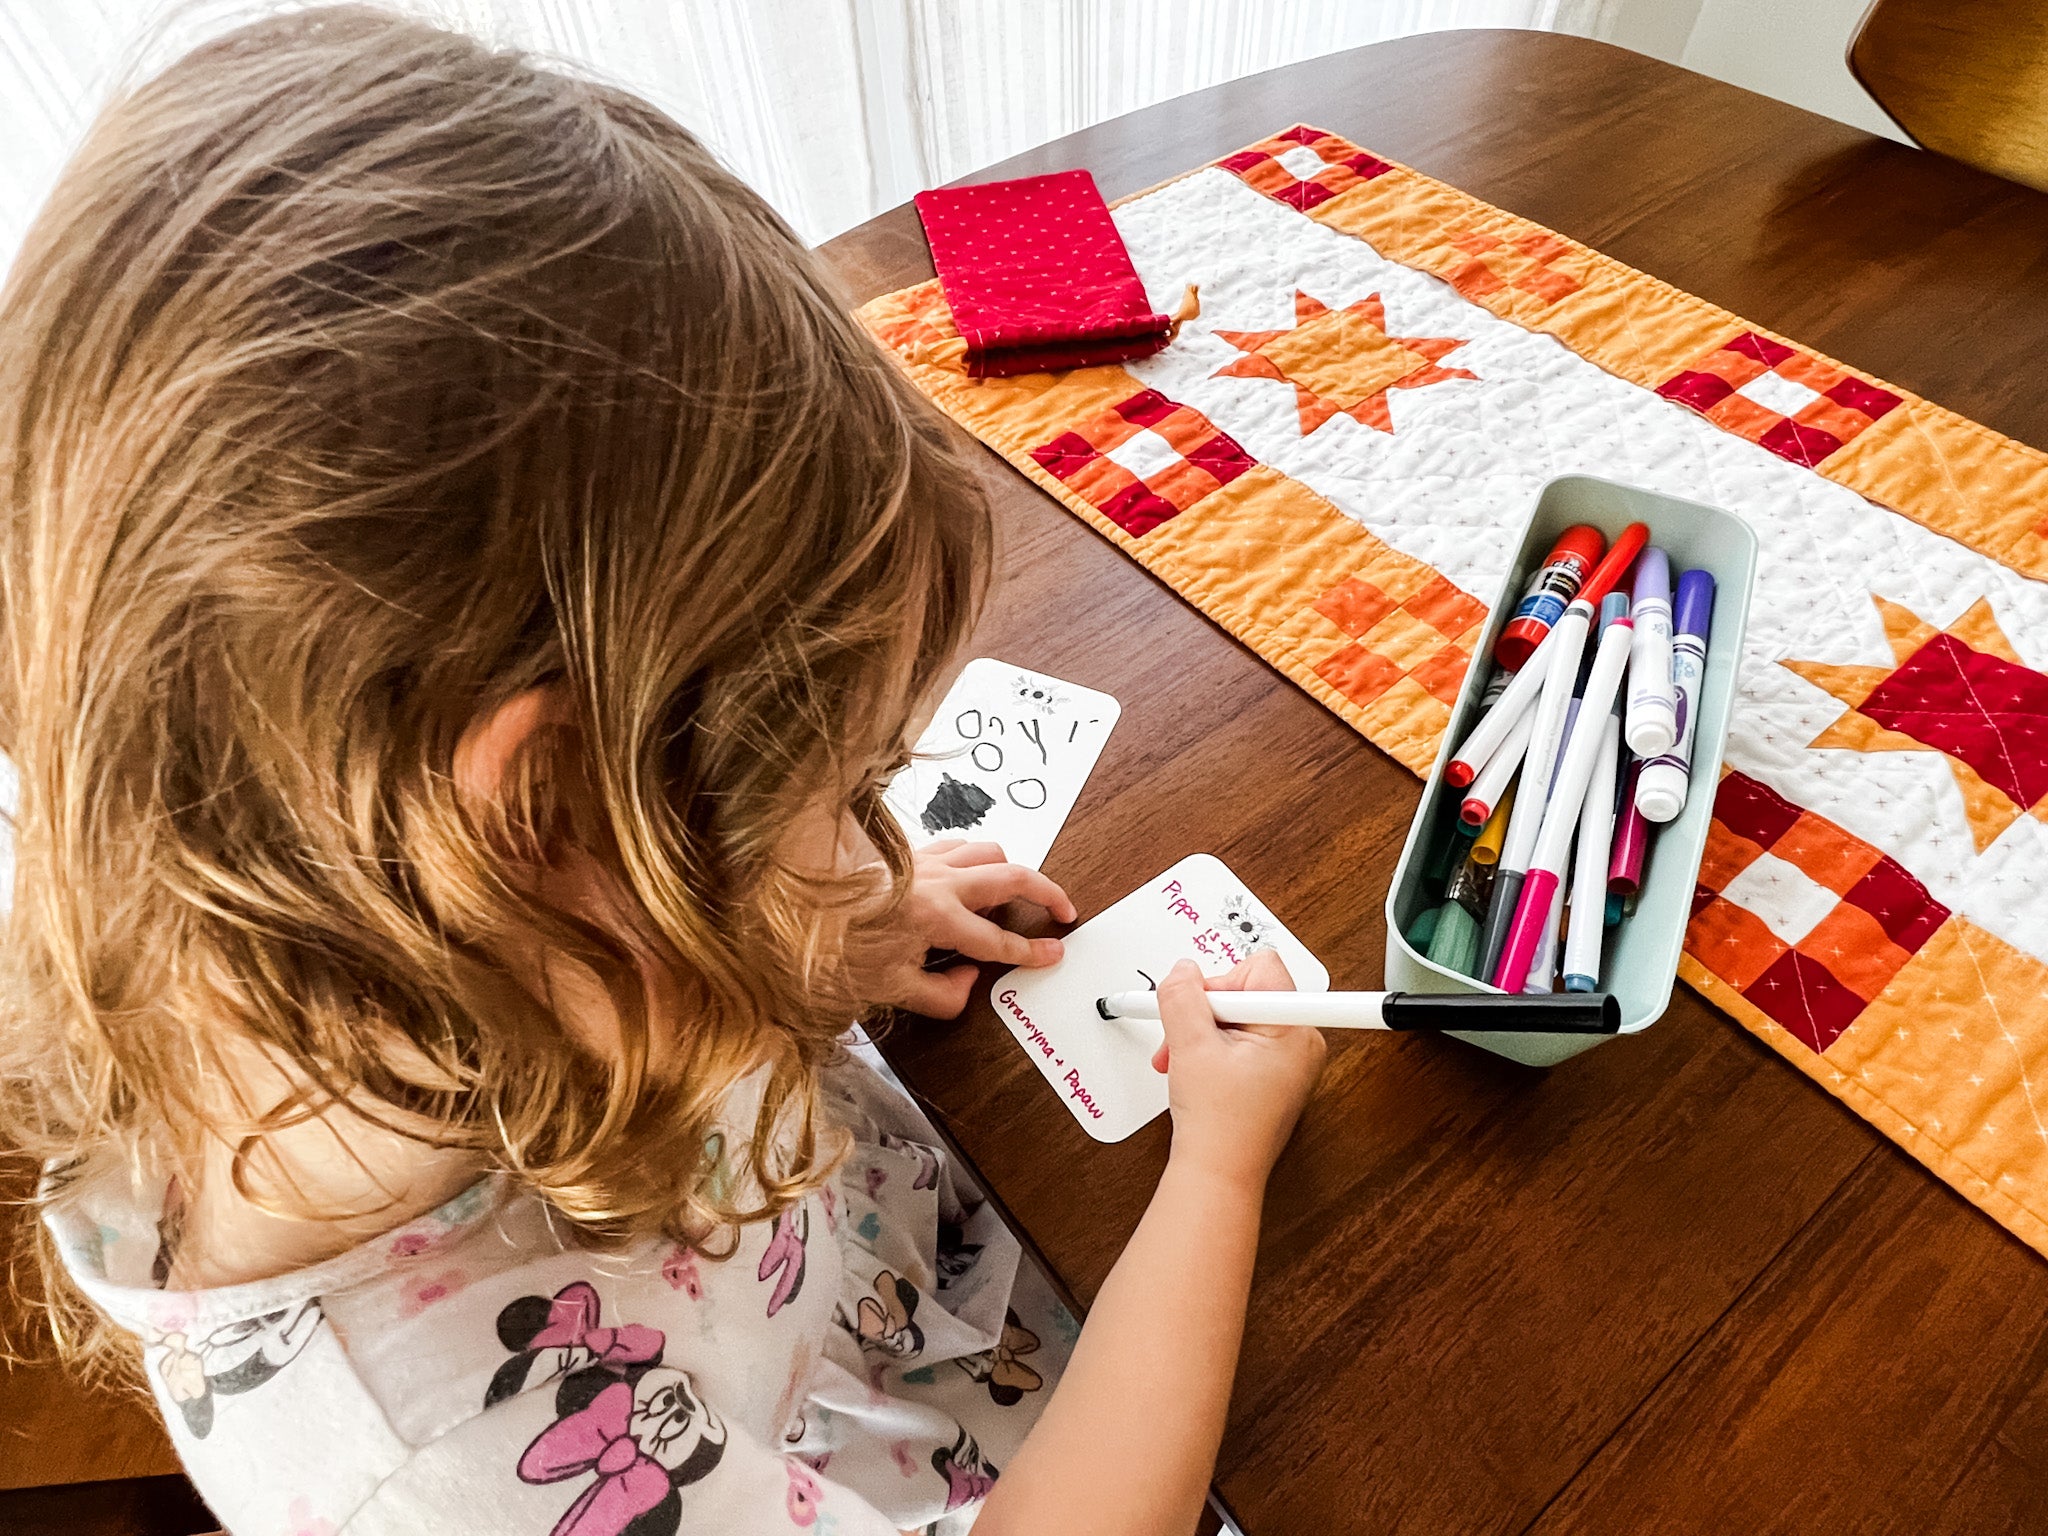 pippa, 3, drawing on a blank gratitude journaling card for the pockets full of blessings quilted table runner